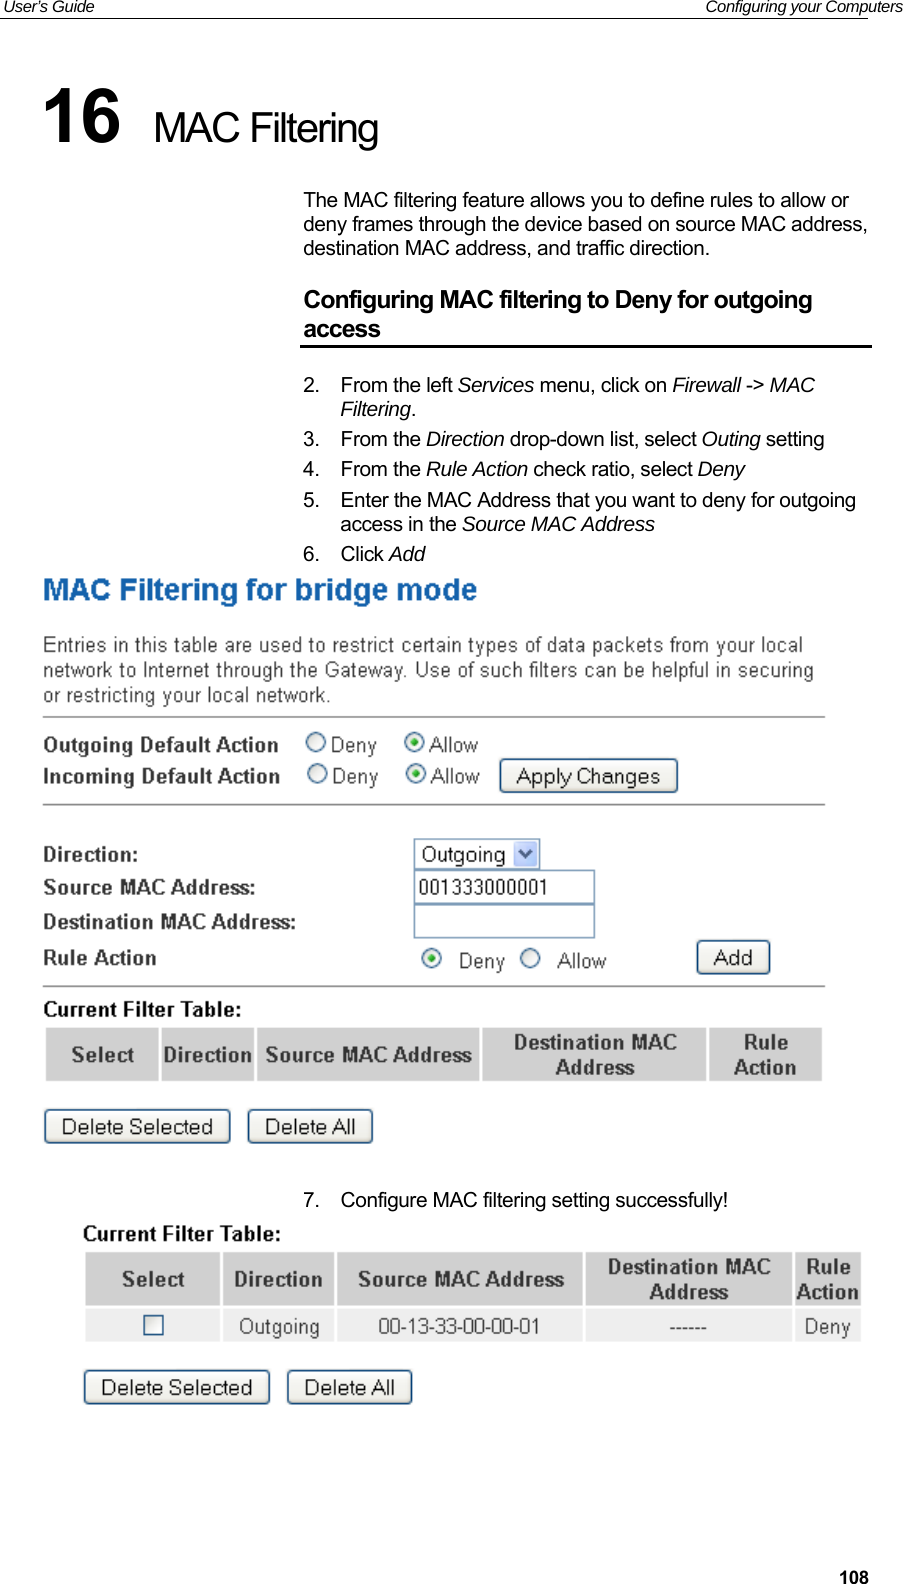 User’s Guide   Configuring your Computers  10816  MAC Filtering The MAC filtering feature allows you to define rules to allow or deny frames through the device based on source MAC address, destination MAC address, and traffic direction. Configuring MAC filtering to Deny for outgoing access 2.  From the left Services menu, click on Firewall -&gt; MAC Filtering. 3.  From the Direction drop-down list, select Outing setting 4.  From the Rule Action check ratio, select Deny 5.  Enter the MAC Address that you want to deny for outgoing access in the Source MAC Address 6.  Click Add    7.  Configure MAC filtering setting successfully!   